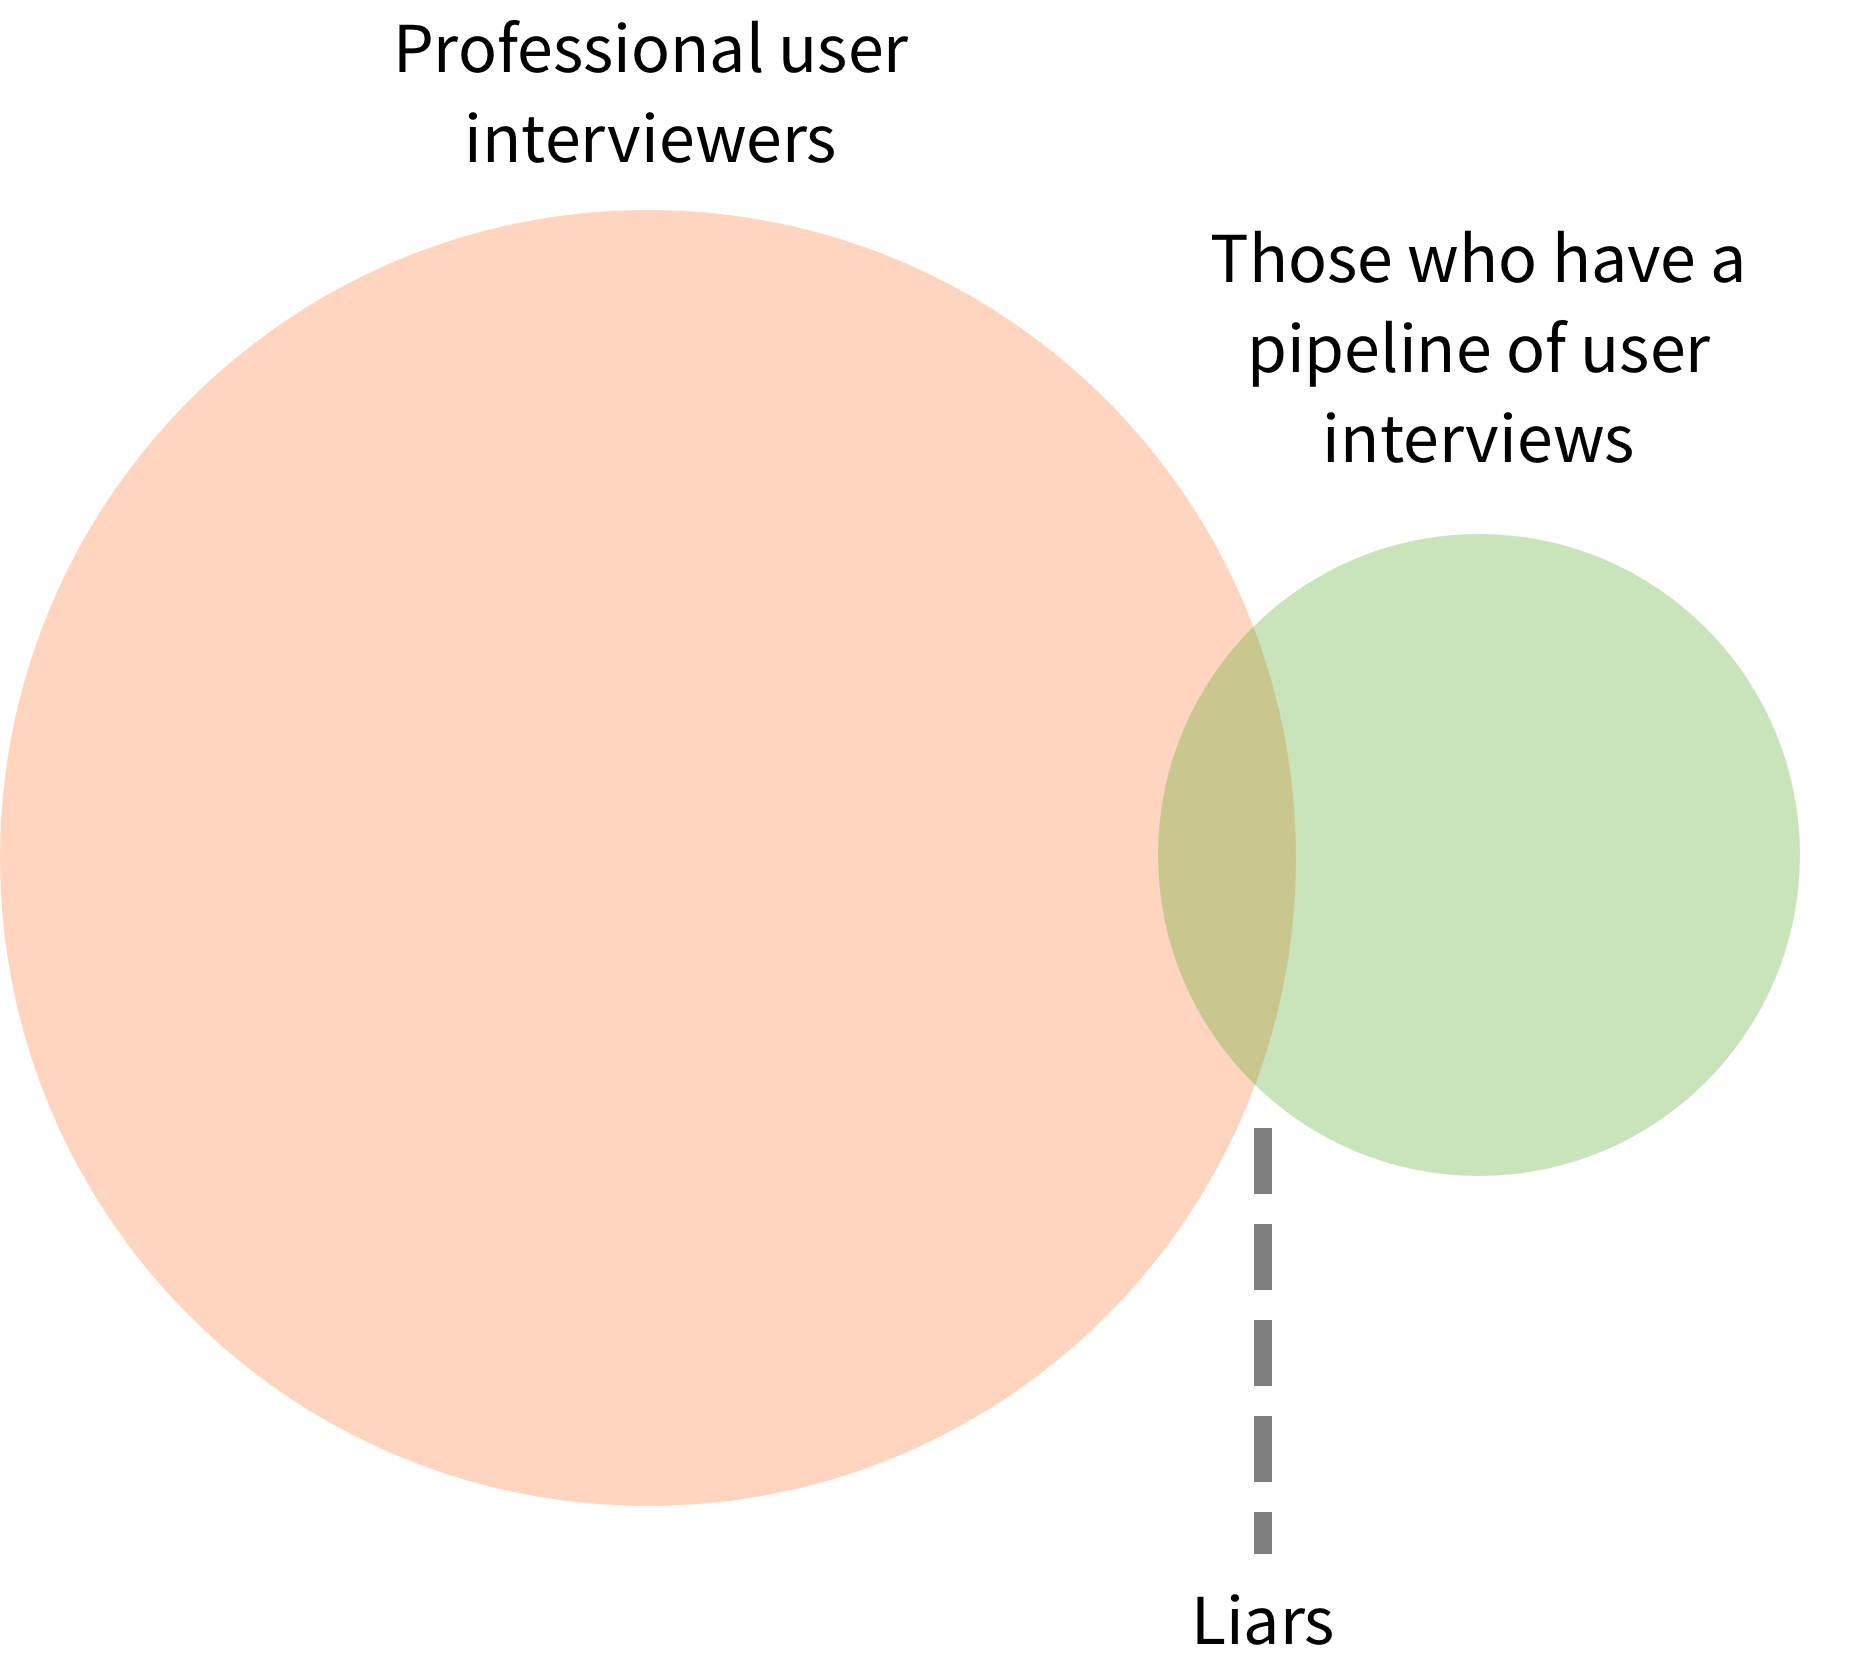 Venn diagram of pro user interviews and those who have a pipeline